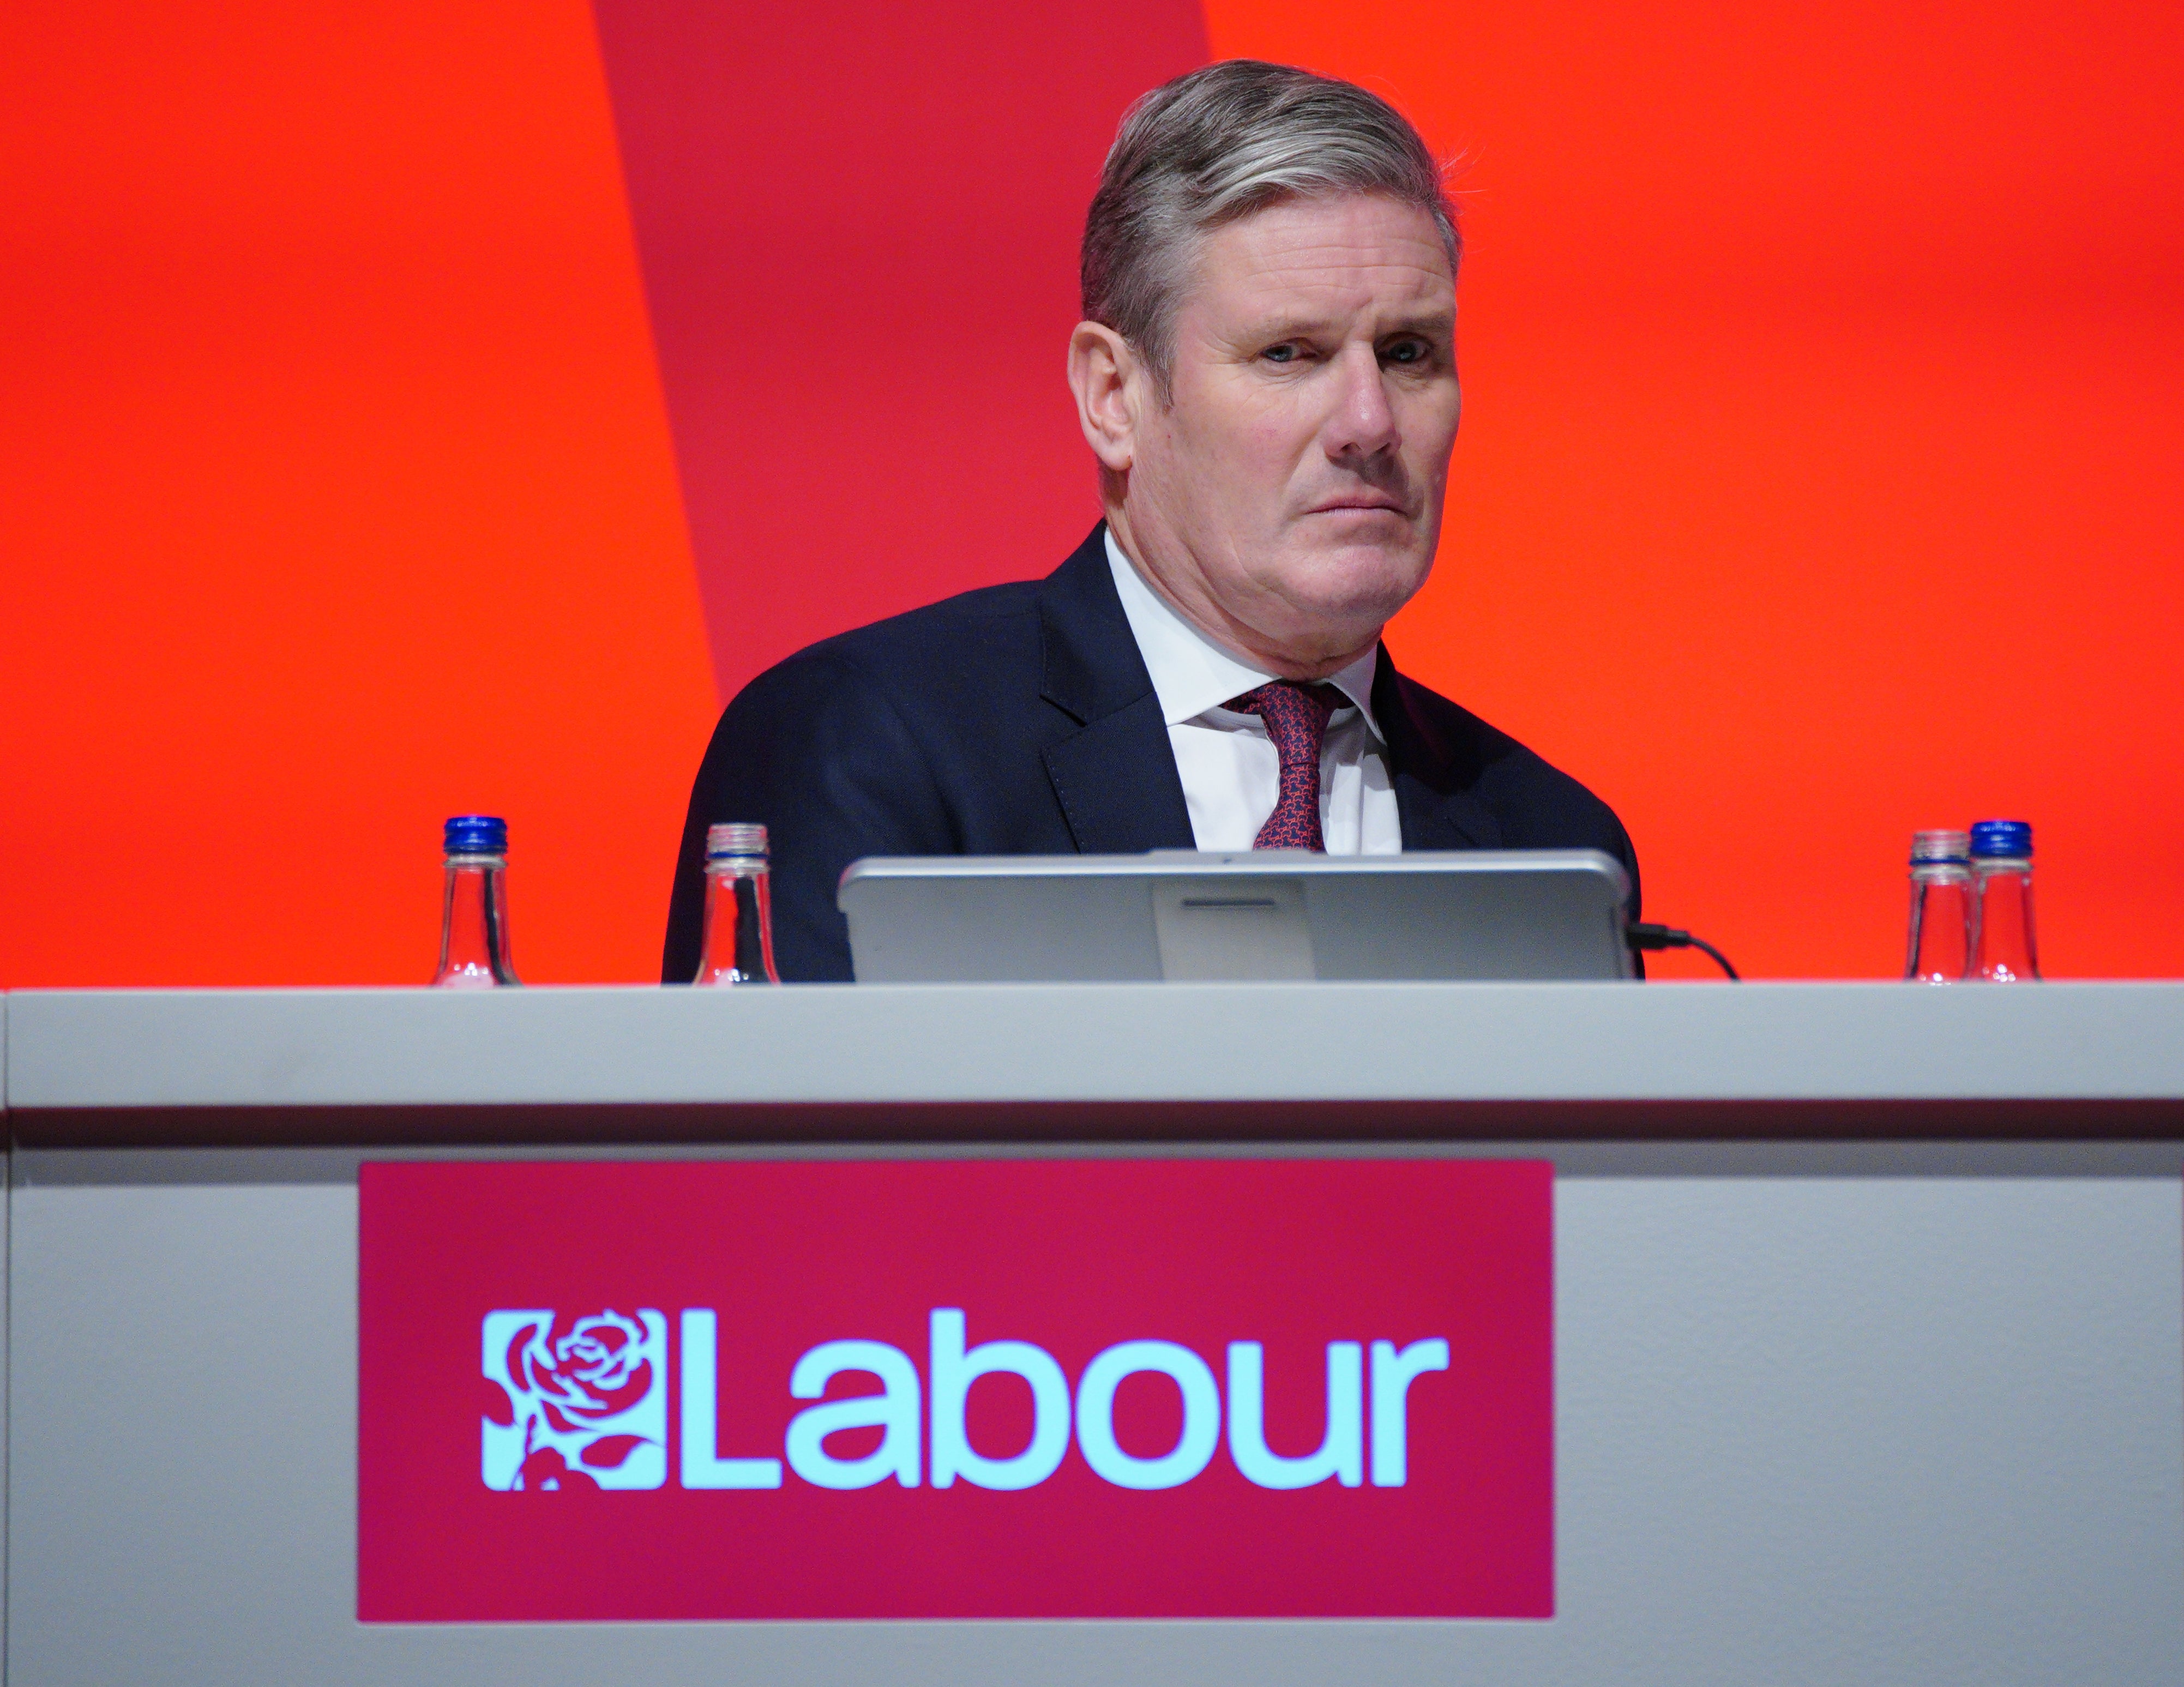 Party leader Sir Keir Starmer will address the issue of Scottish independence in his speech (Peter Byrne/PA)